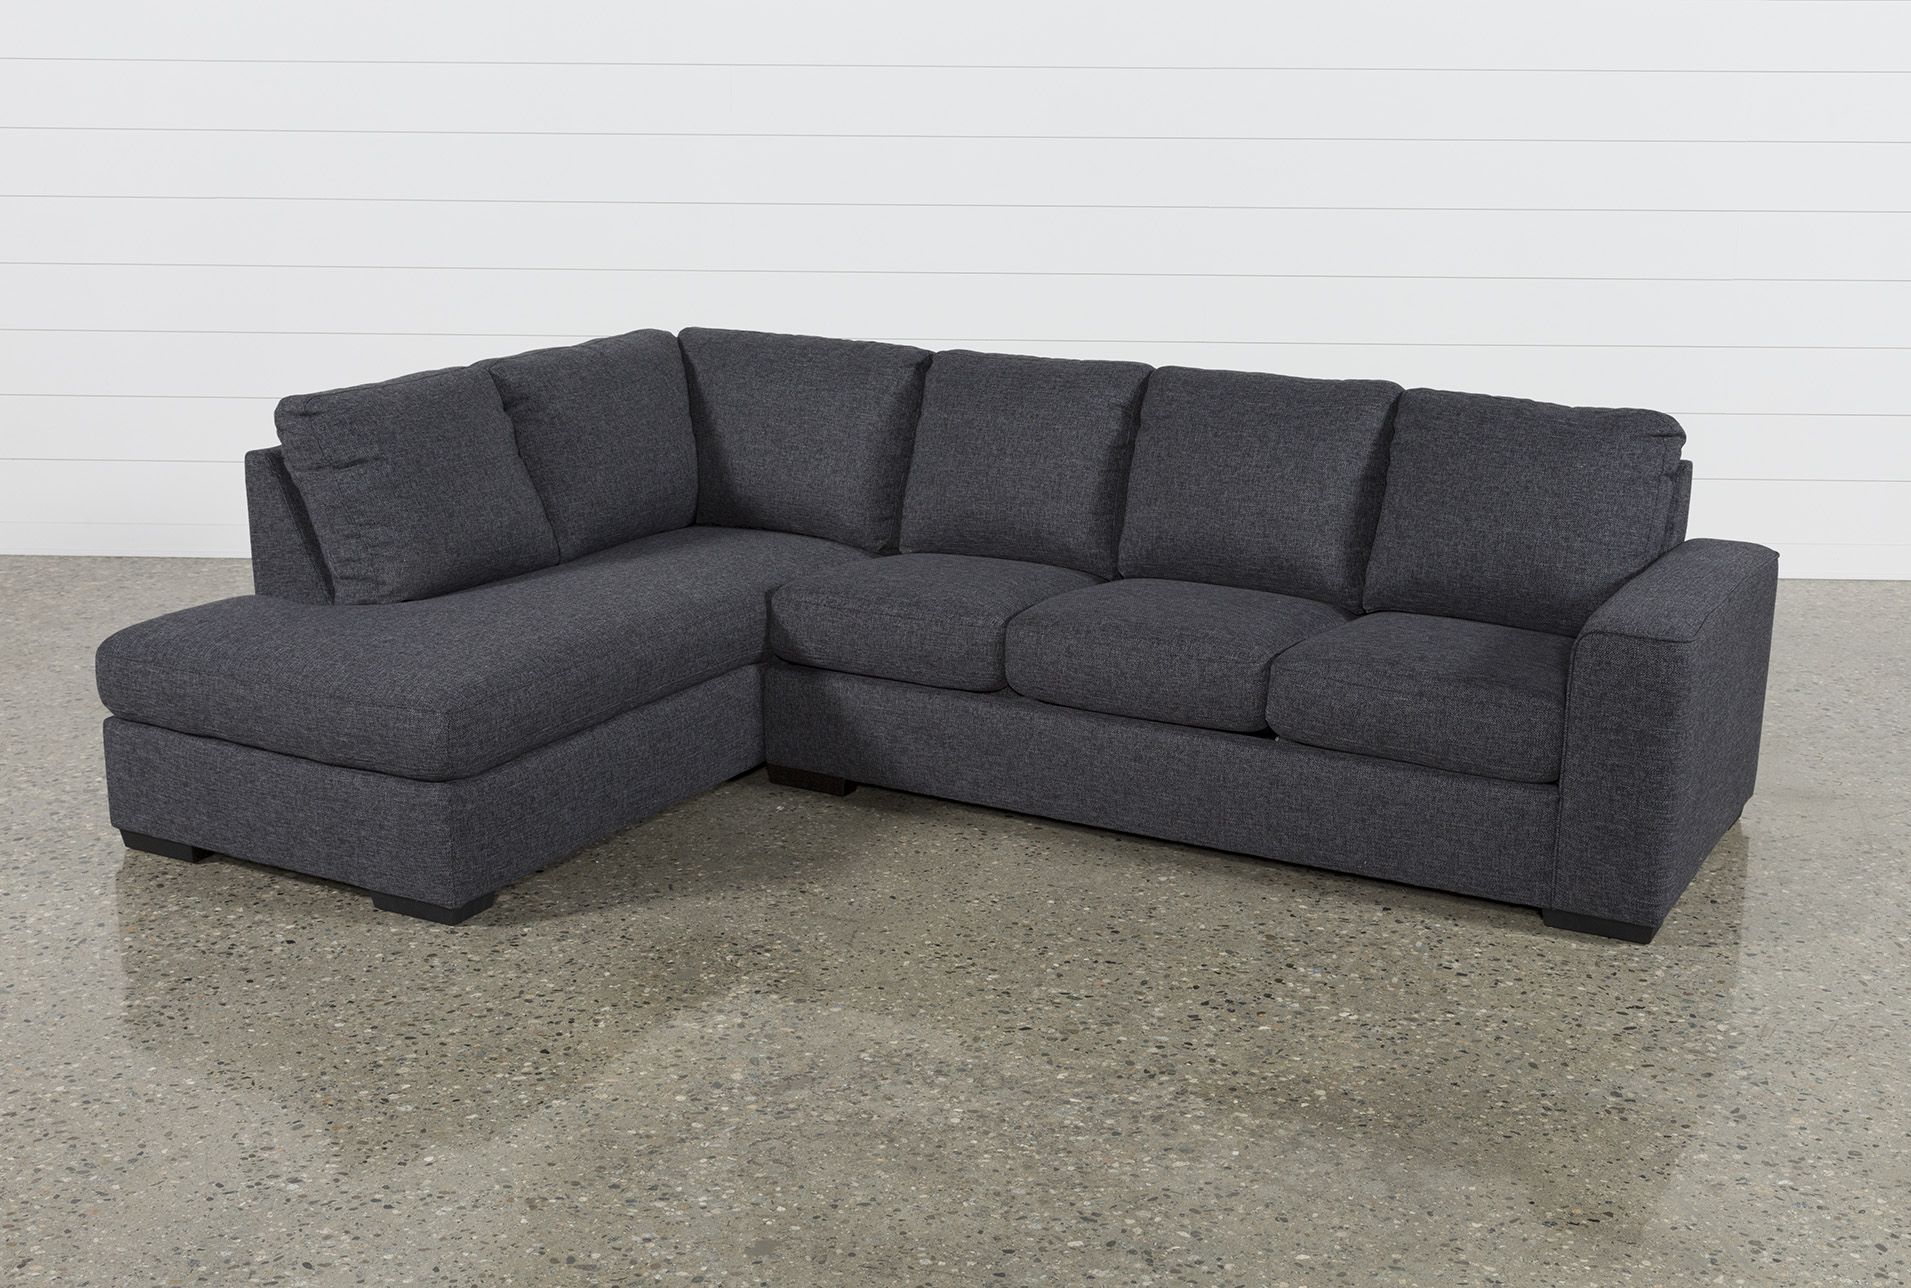 Lucy Dark Grey 2 Piece Sectional Sofa With Left Arm Facing Chaise Pertaining To Dark Gray Sectional Sofas (Gallery 15 of 20)